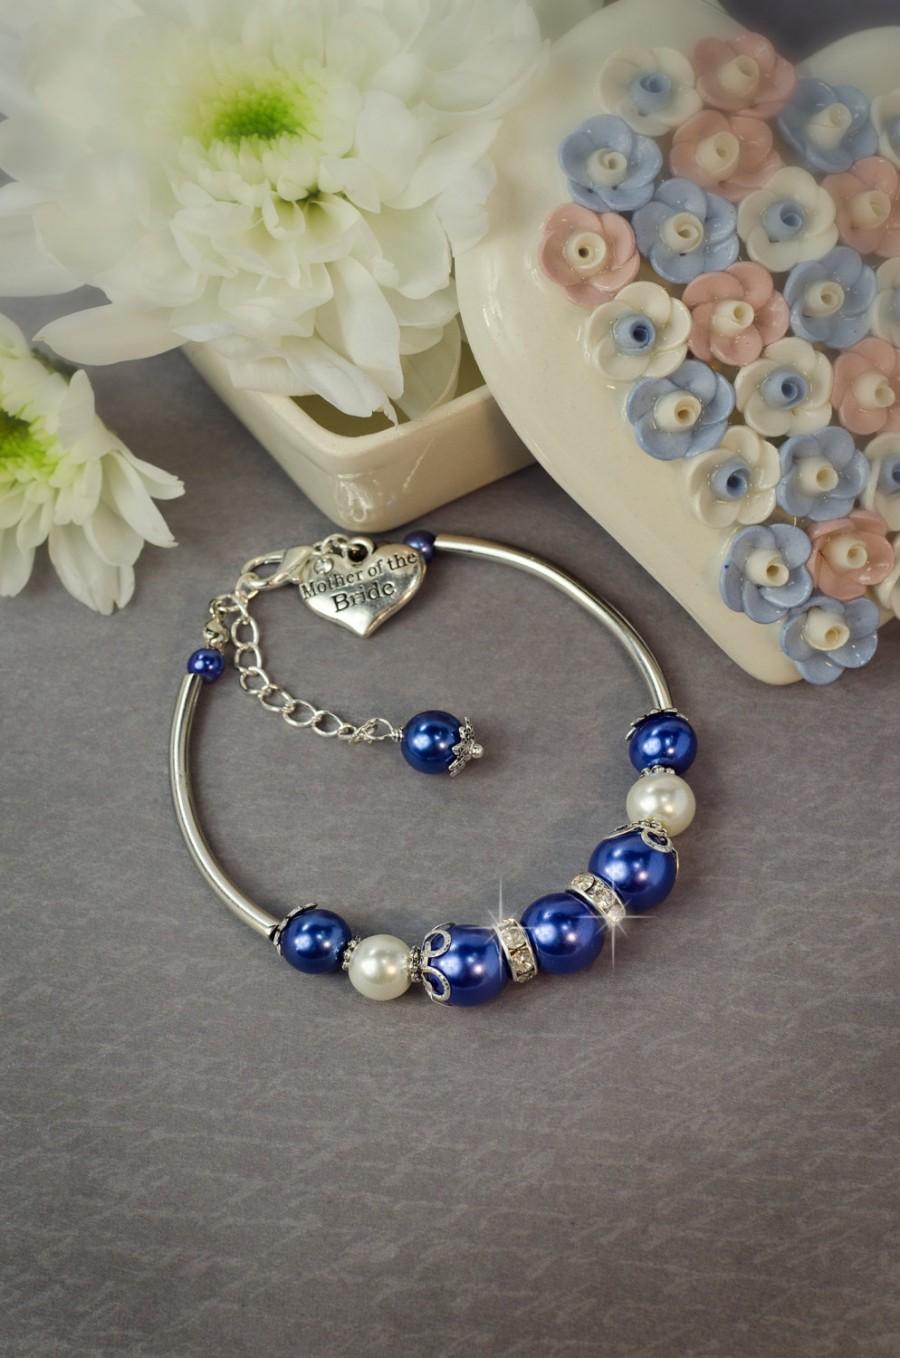 Wedding - Mother of the bride gift Jewelry Mother of the groom bracelet Gift for Mom Mother Jewelry Charm bracelet Navy blue bridesmaid